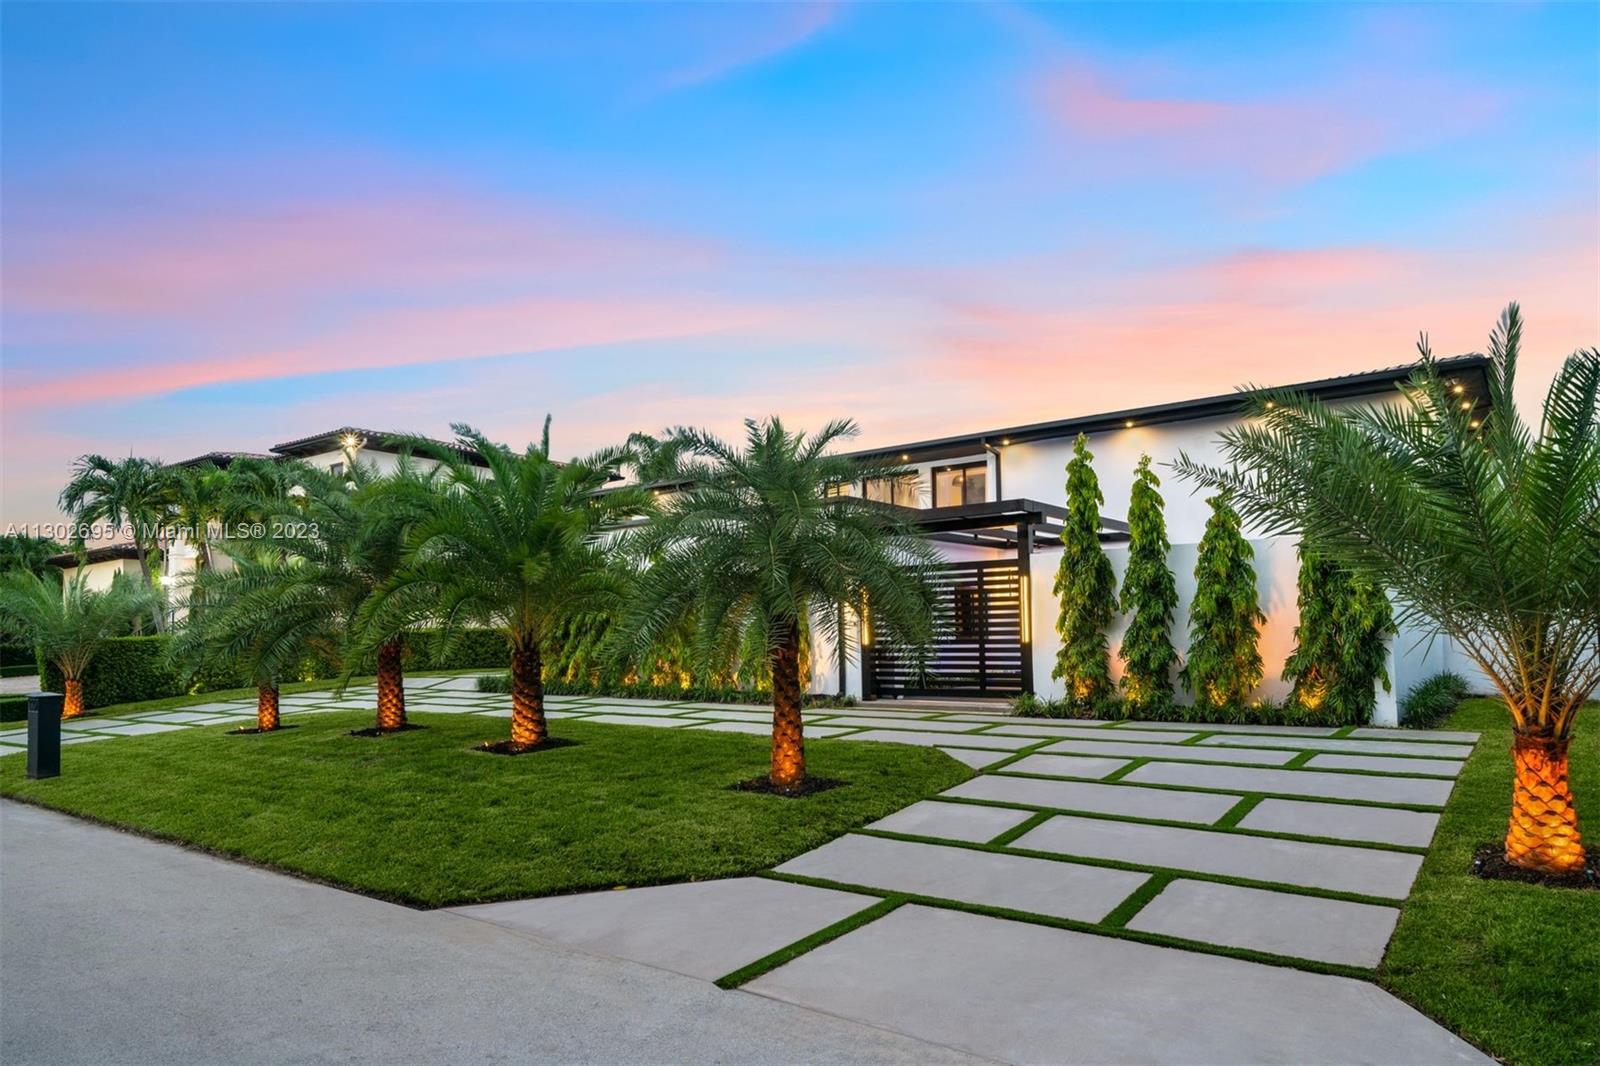 2021 Fully Renovated 8 bds 8 full bath luxury home in Gables by the Sea with 100' Direct Ocean Access & No
Bridges to Biscayne Bay. All new electric, plumbing, cement tile roof, drywall, full impact glass, 48x48 porcelain
floors, 4-zone AC, 2-car lift-capable garage, 2 laundry rooms,14 TVs & 16 cameras. Infinity edge heated saline
pool w/ beach entry, patio & full summer kitchen. All new Thermador appliances, Fisher & Paykel range including
gas appliances, wine display. New 80' epay wood dock included & in the permit process. Spacious 2nd floor
principal bdrm, sitting room, wet bar & huge closet. Everything you desire in a 24/7 guard-gated, pedestrian
friendly Coral Gables Community with closed-end quiet streets, a park & top tier schools & municipal services
and a voluntary HOA.